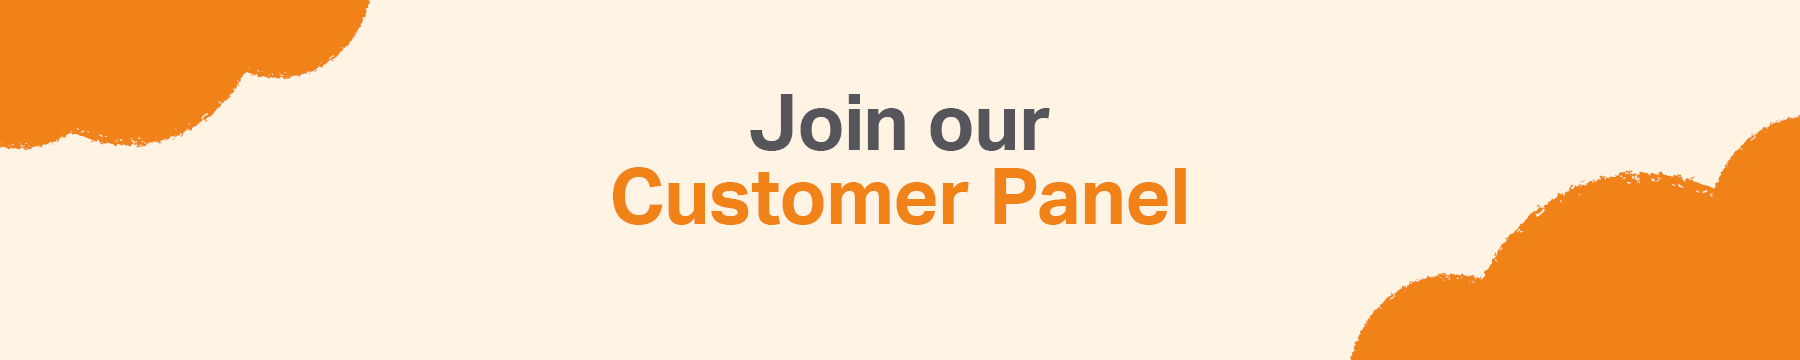 Join our Customer Panel